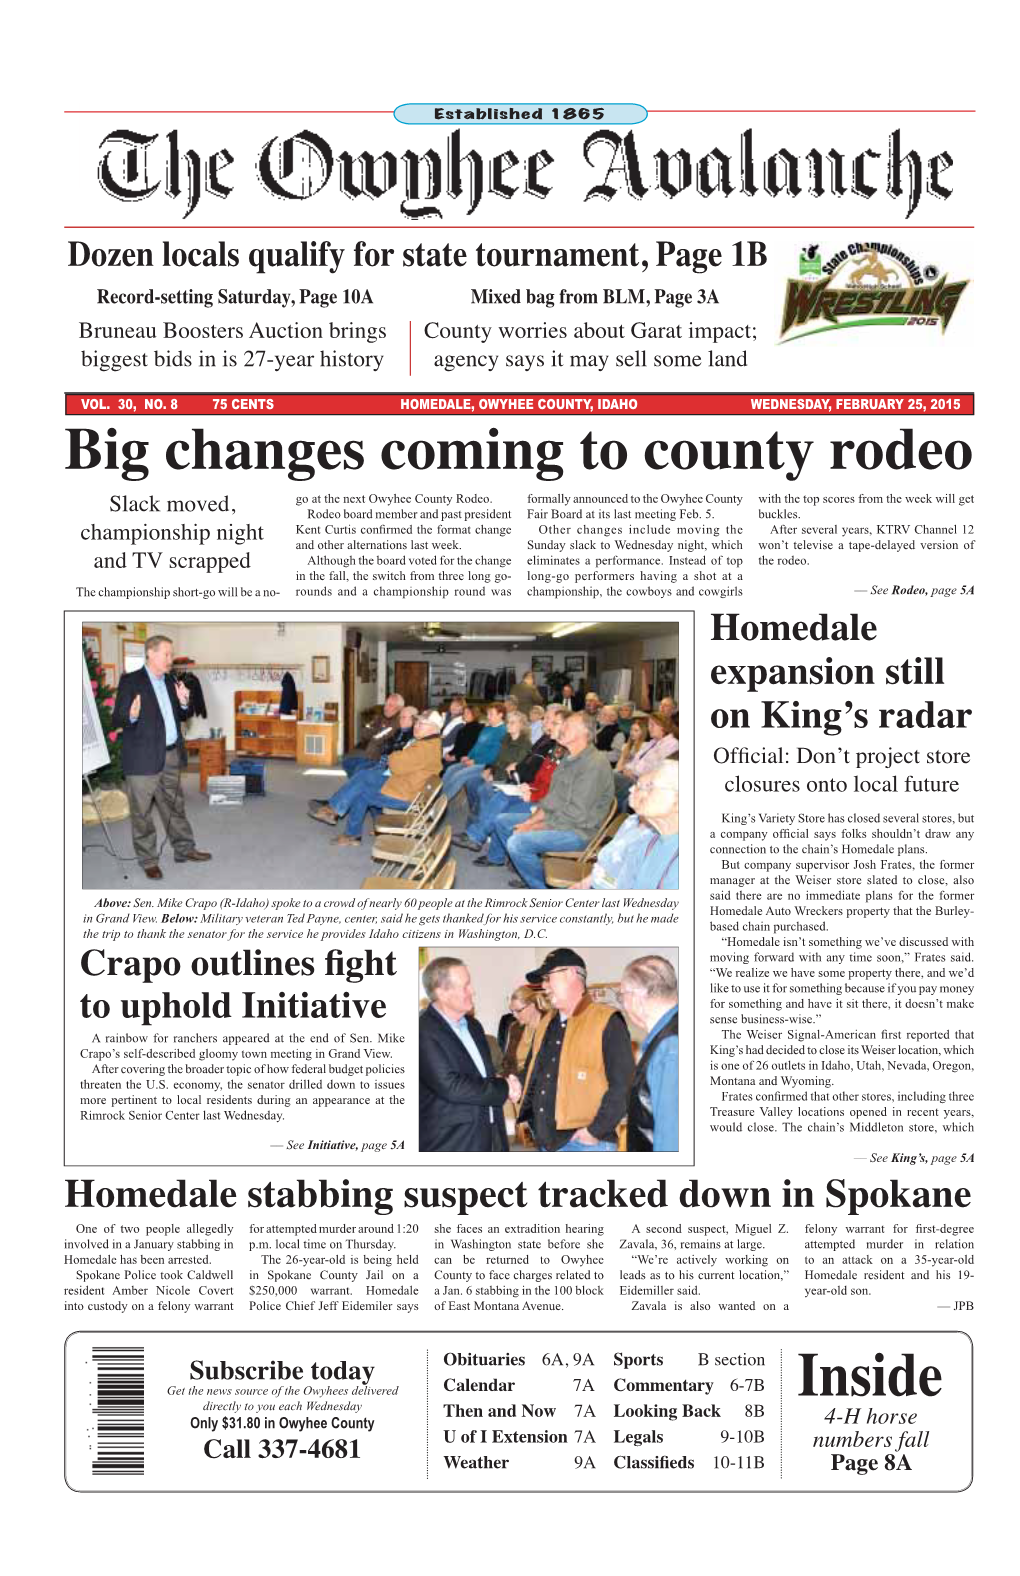 HOMEDALE, OWYHEE COUNTY, IDAHO WEDNESDAY, FEBRUARY 25, 2015 Big Changes Coming to County Rodeo Go at the Next Owyhee County Rodeo